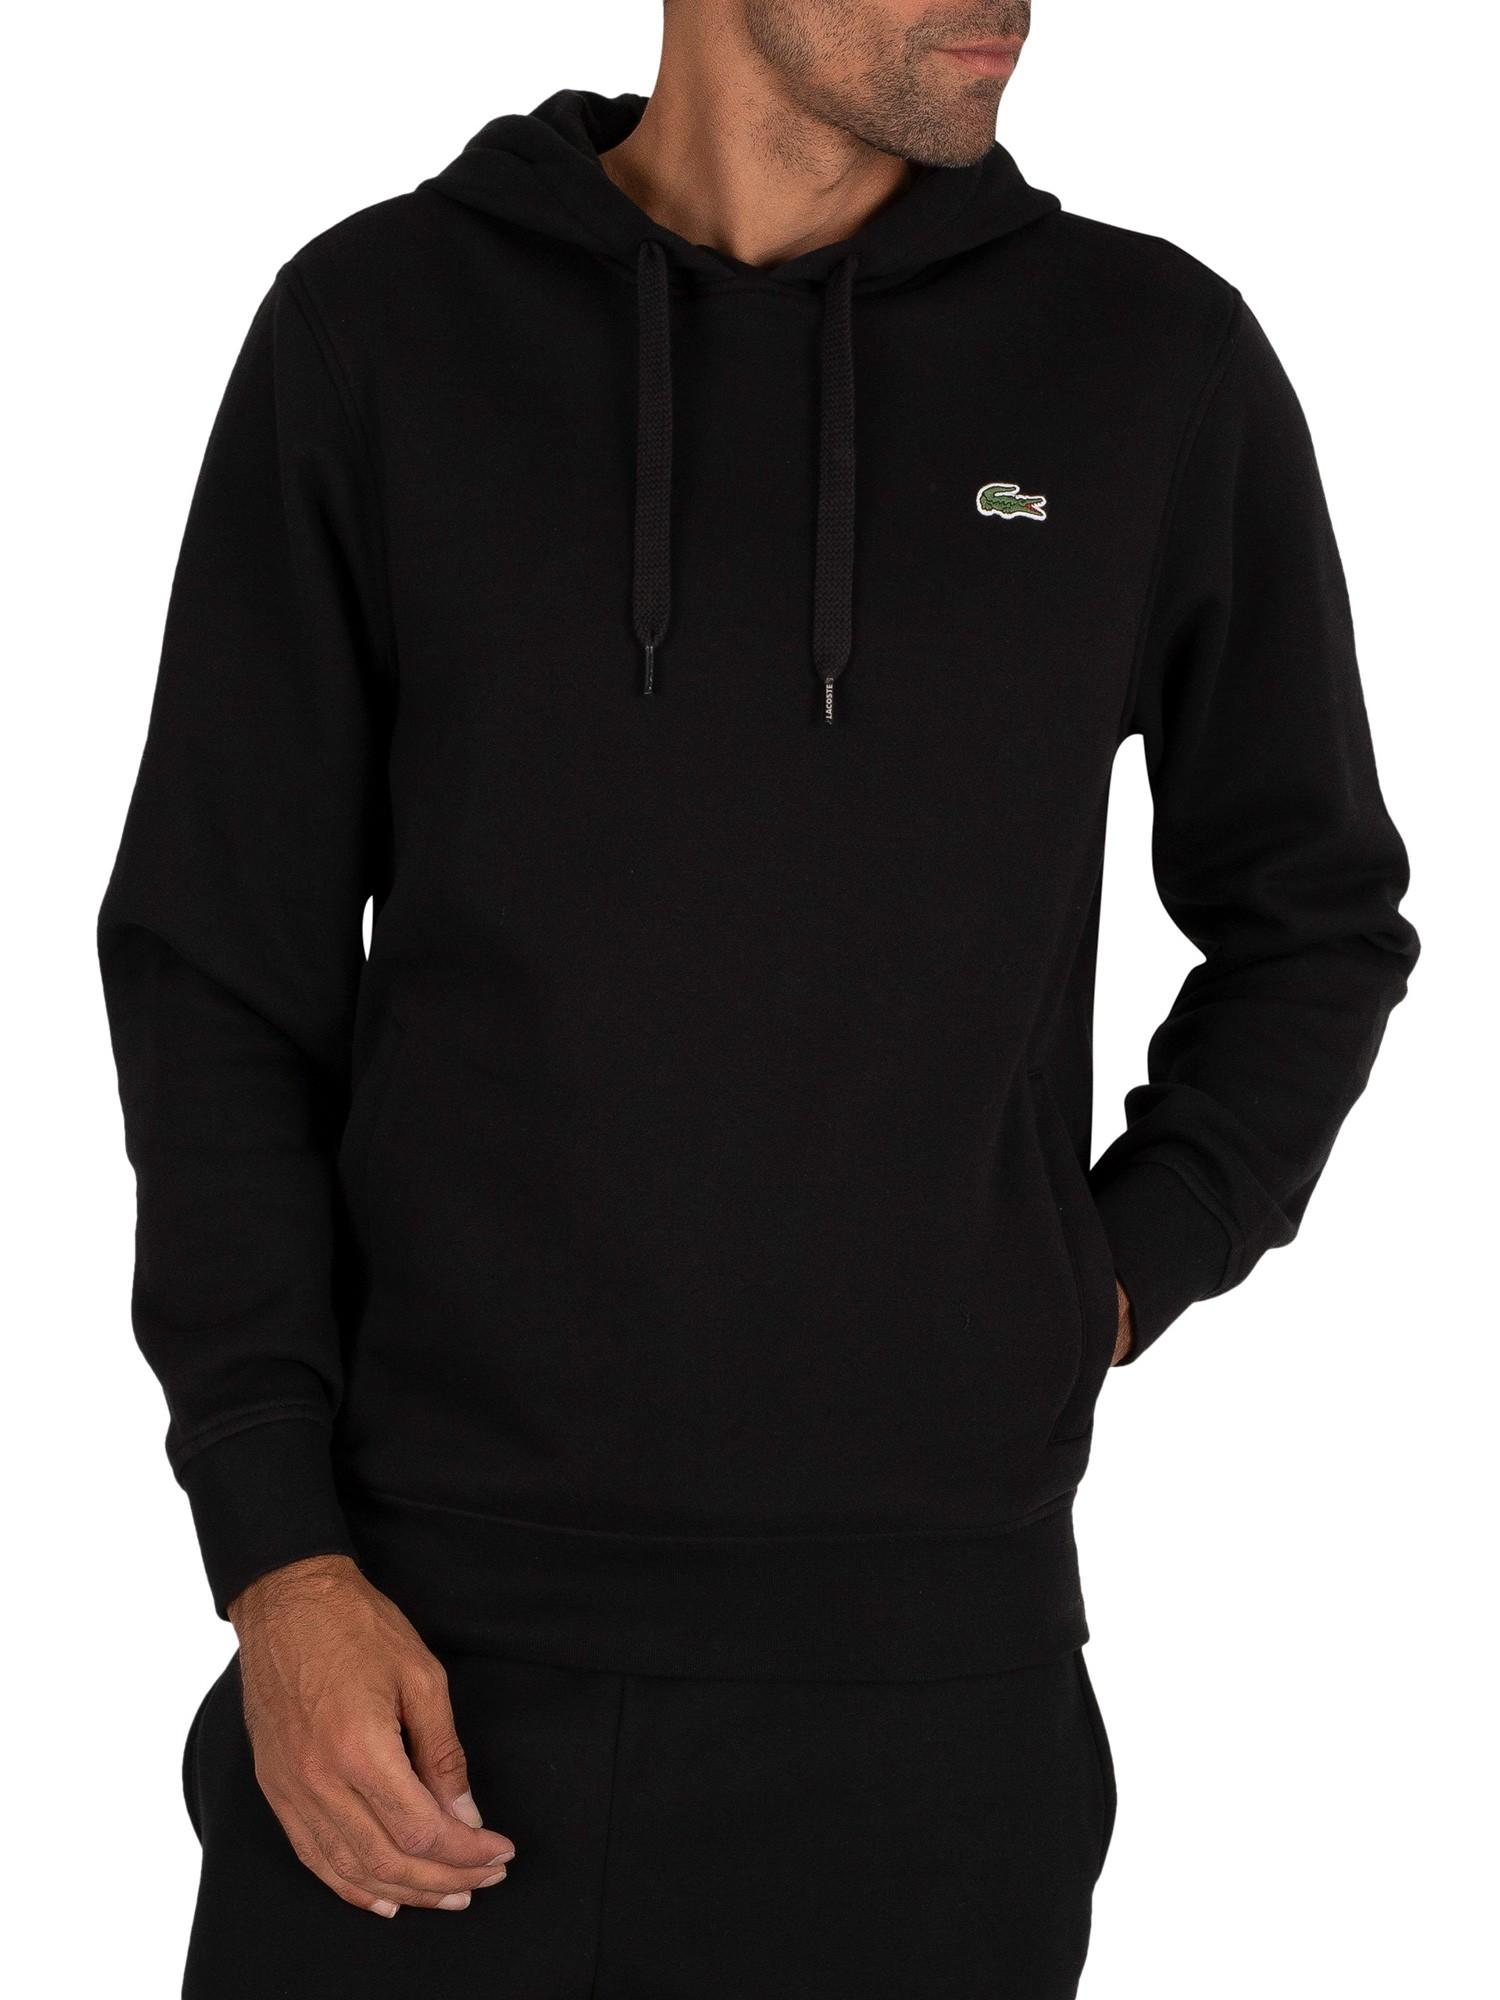 Lacoste Pullover Hoodie in Black for Men - Lyst